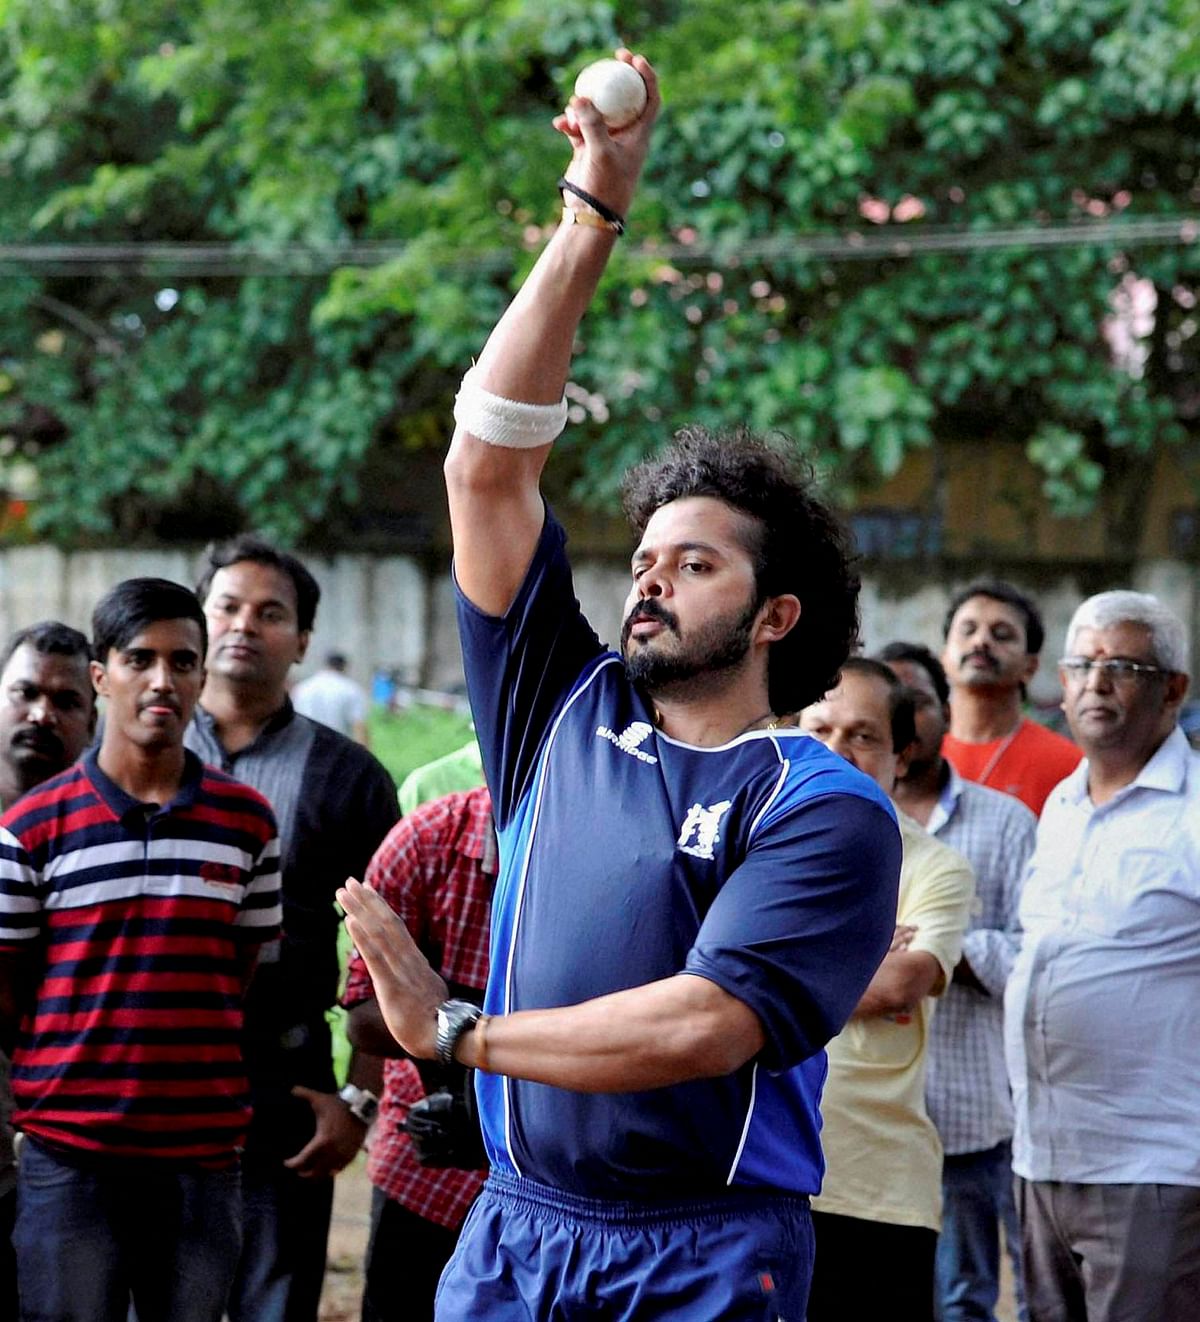 “Highly unlikely that the BCCI will overrule its disciplinary panel’s verdict to ban Sreesanth,” writes Shivam Singh